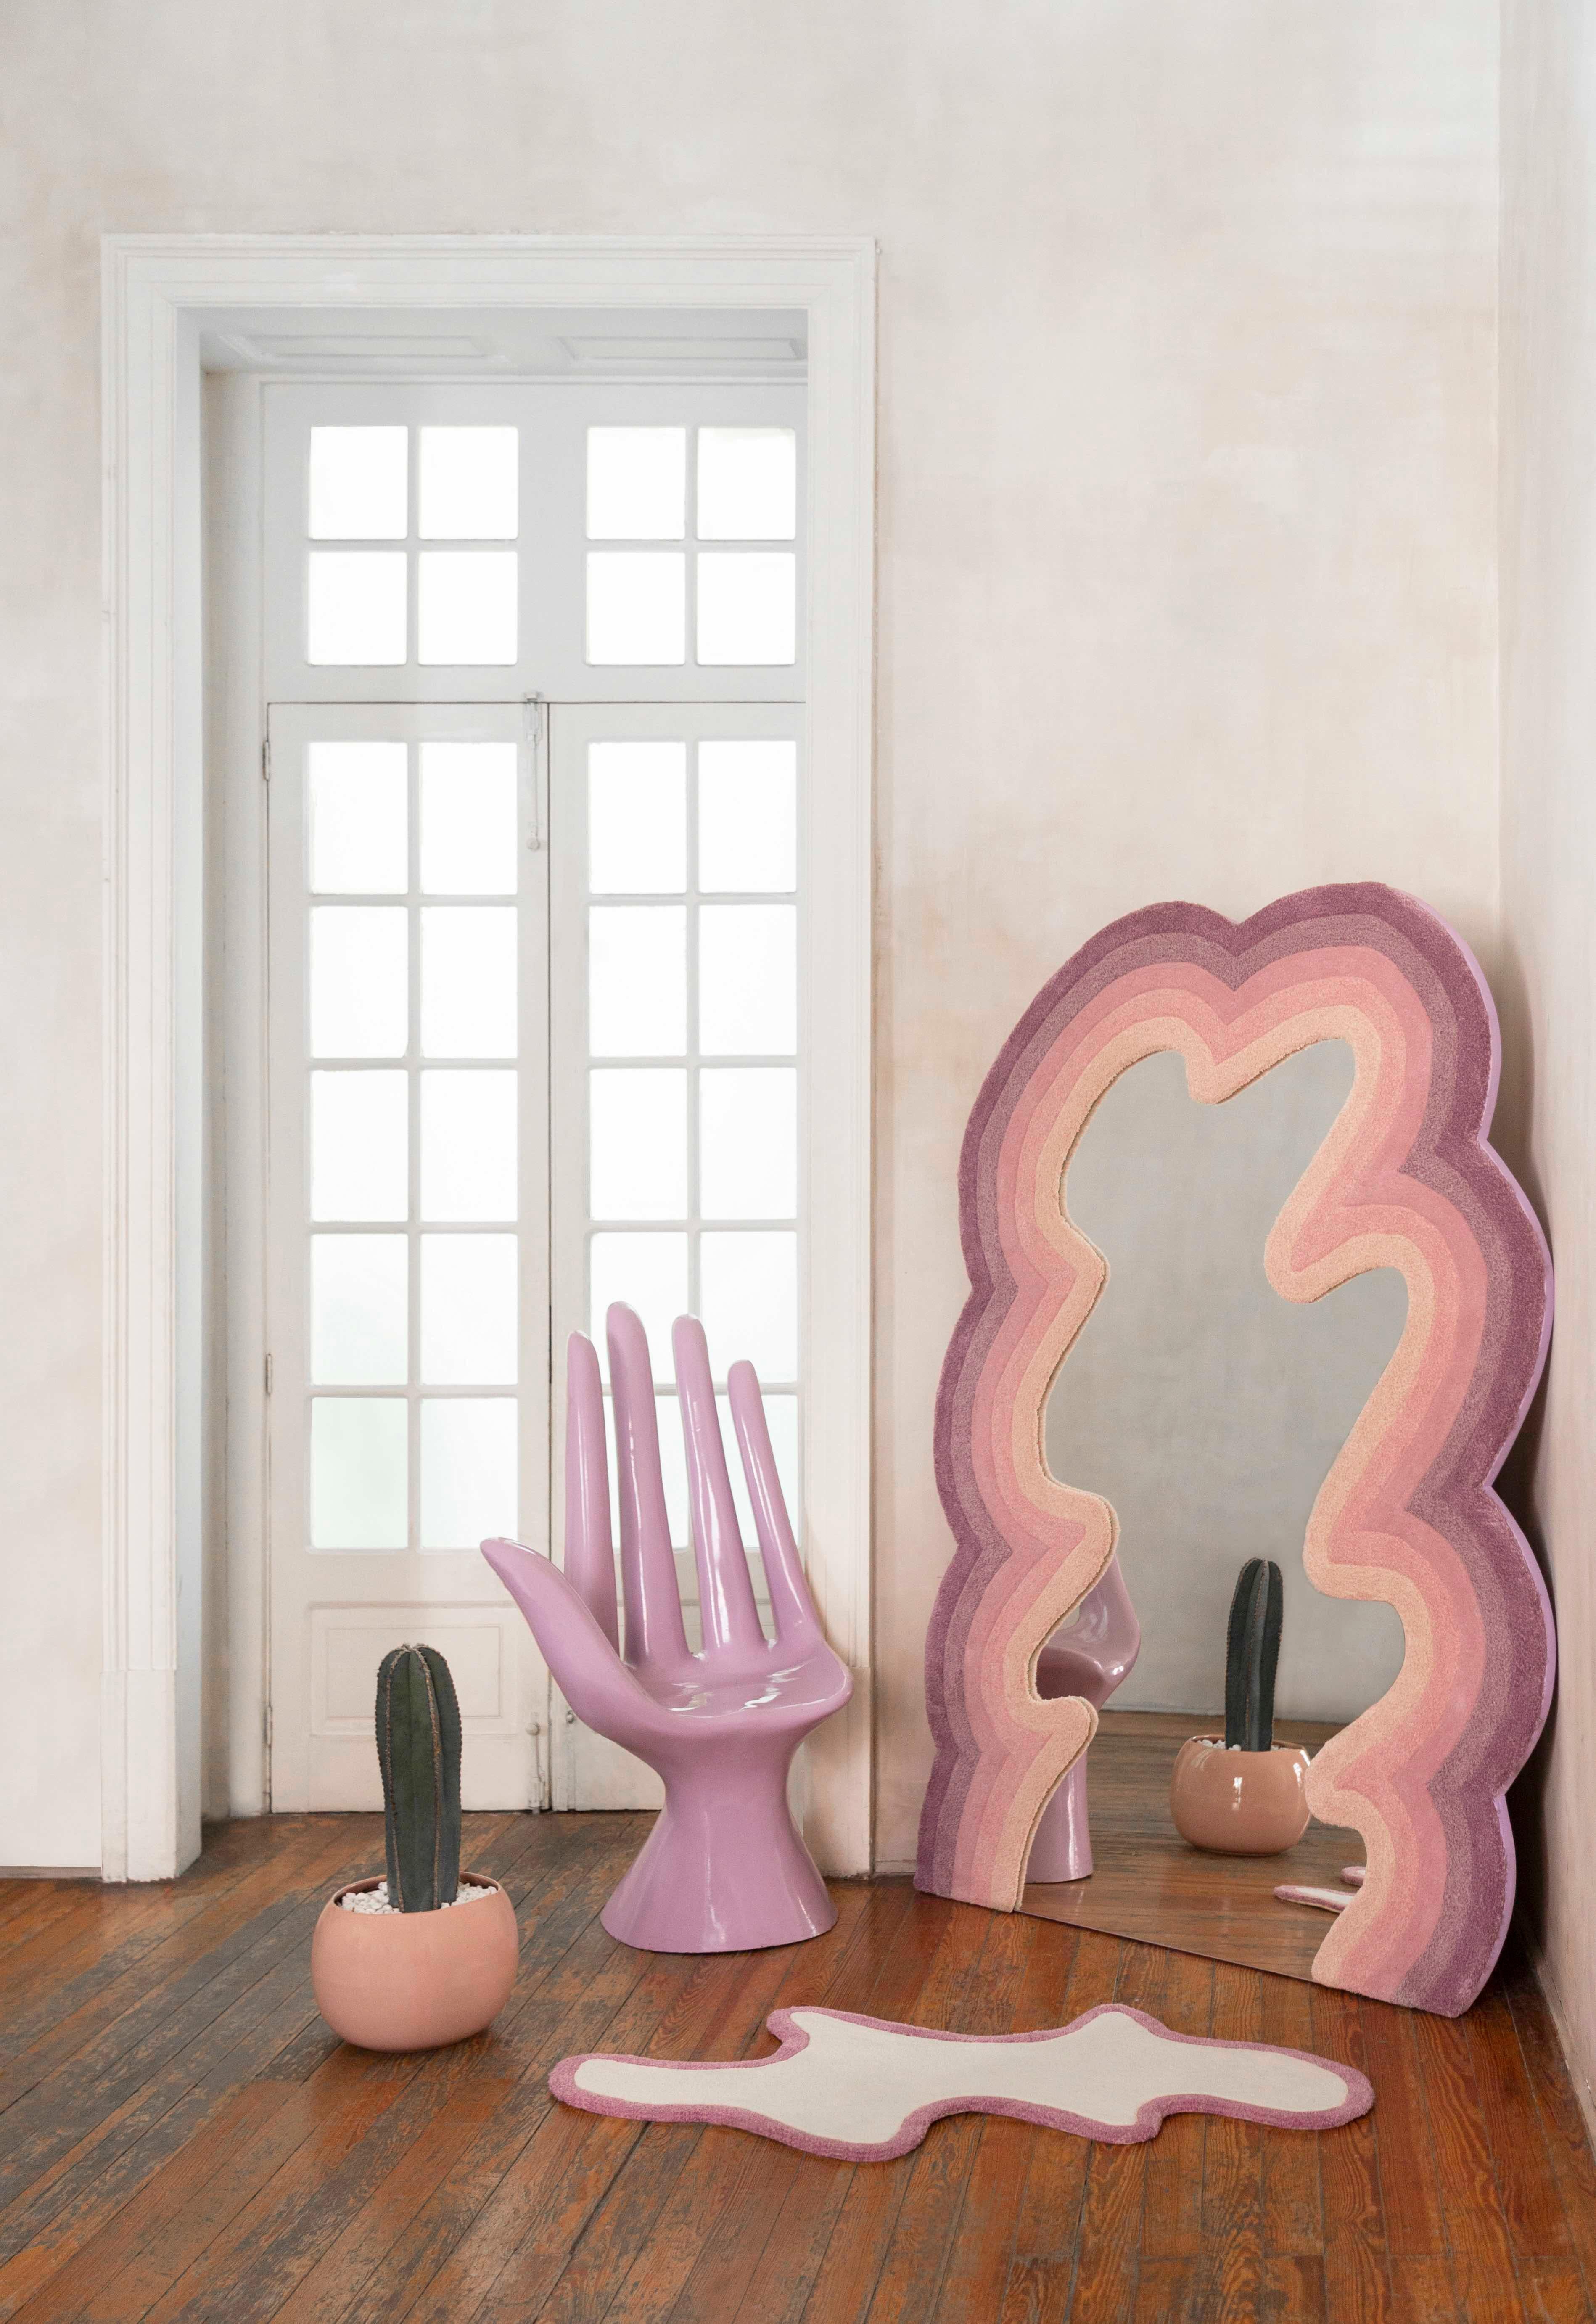 Set of 2 Medusa Mirror and Rug by Brera Studio
Dimensions: 
Rug-framed Mirror: H 190 x W 150 cm.
Wool Rug: L 120 x W 60 cm.
Materials: 100% wool, mirror.

Dimensions measured from extreme points. Please contact us. 

The Medusa rug and